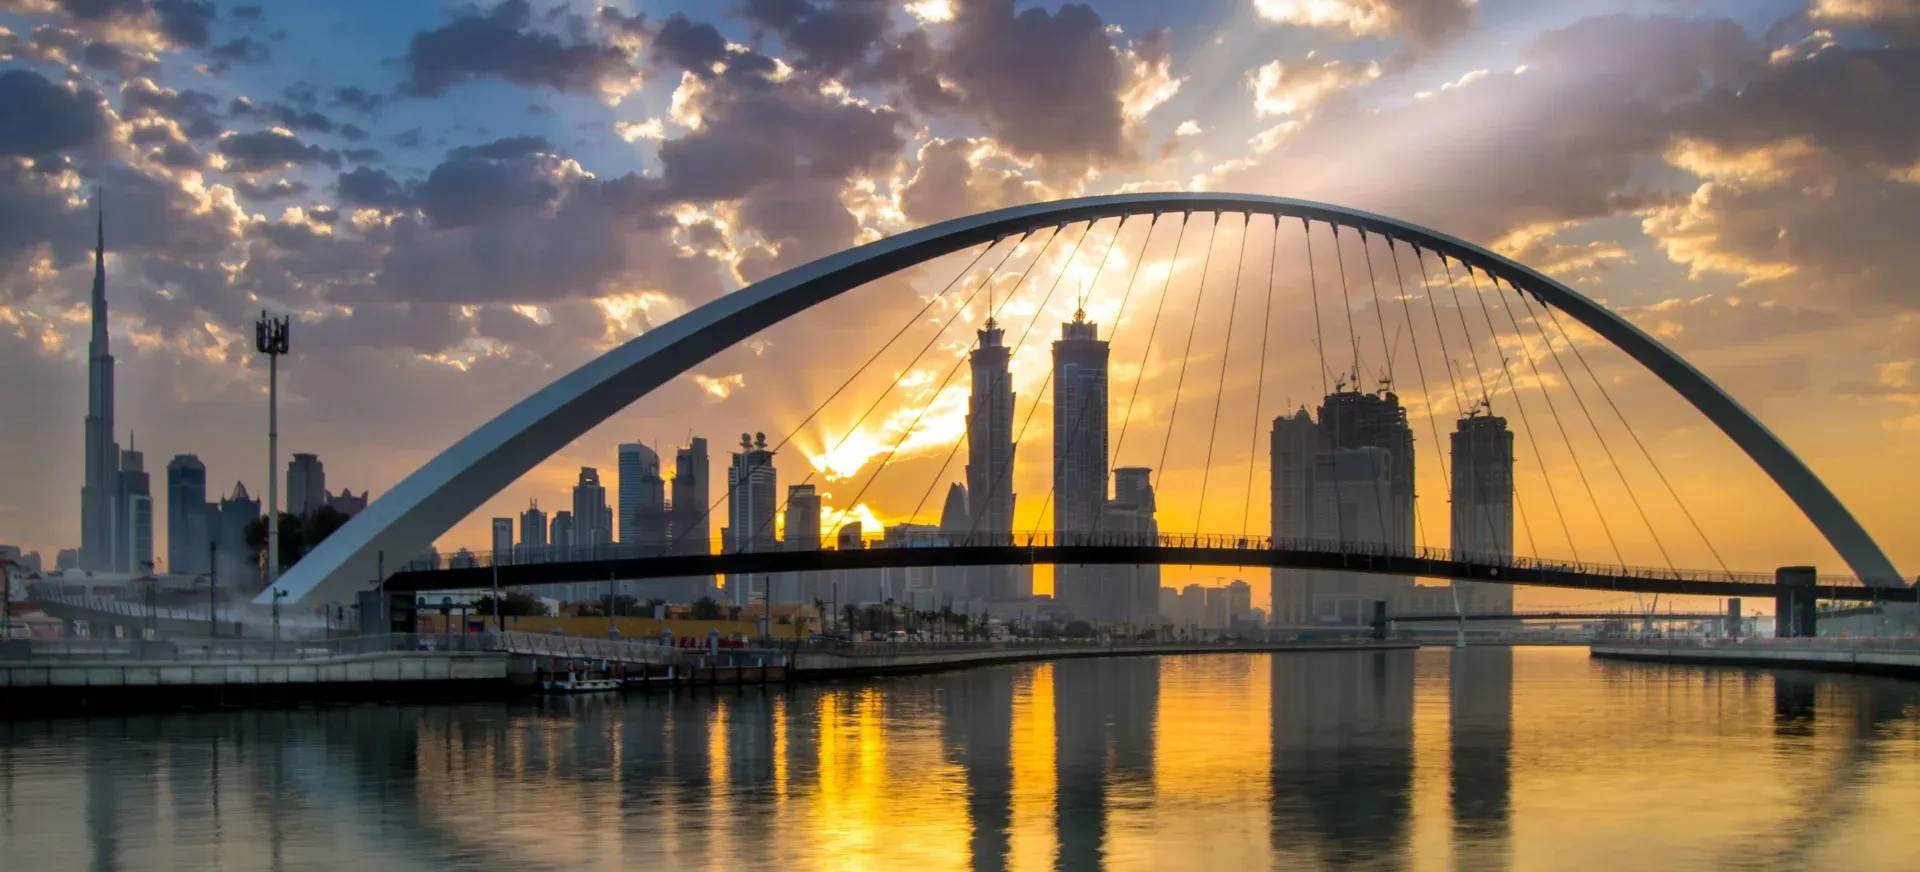 Sunrise over Dubai Downtown as viewed from the Dubai water canal